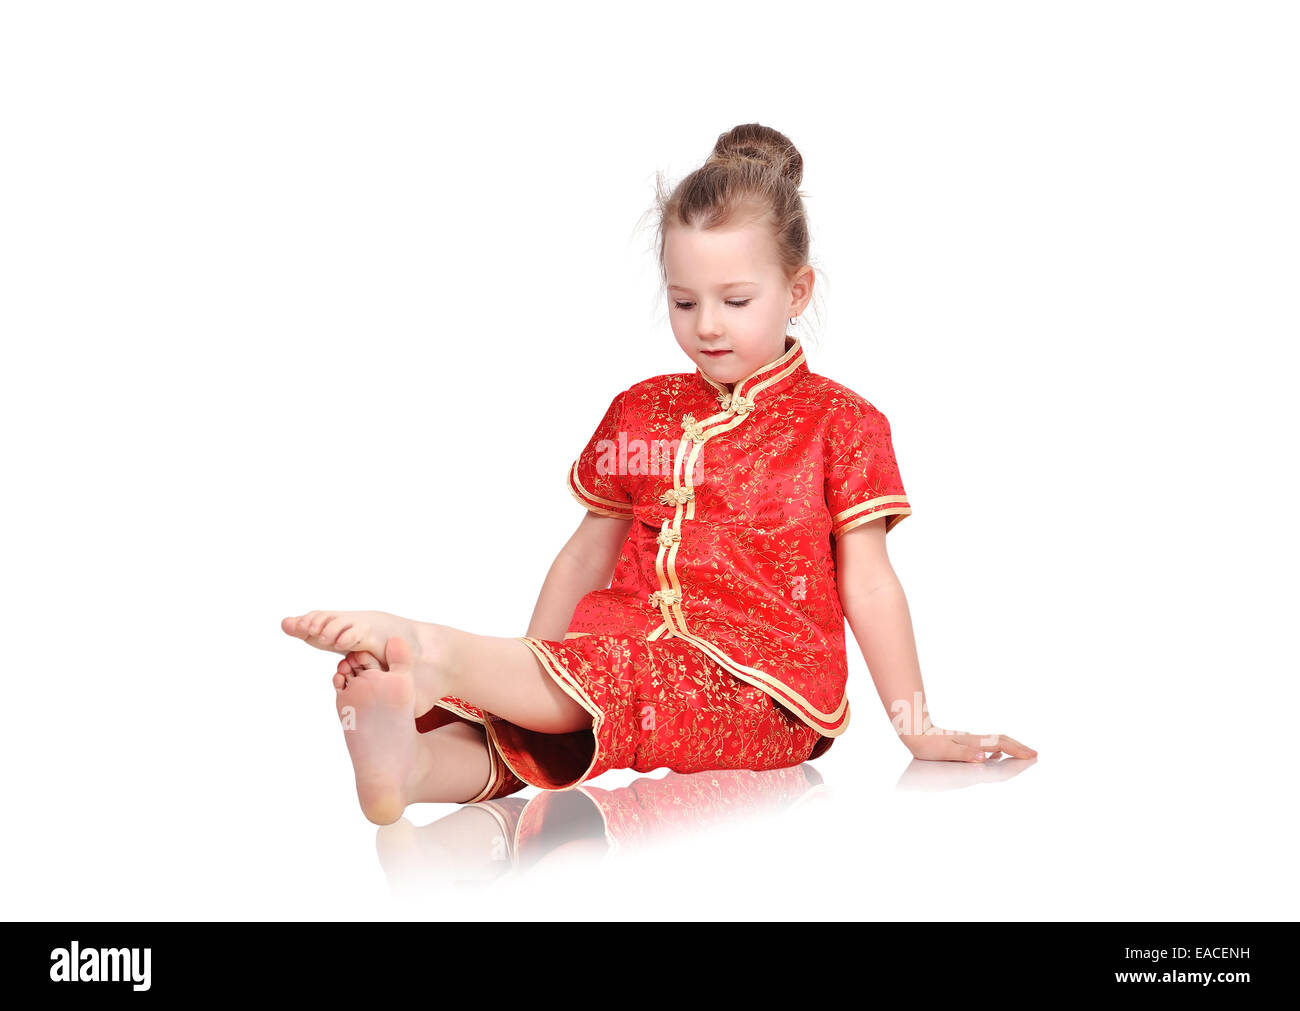 European girl in traditional Chinese dress sitting on floor Stock Photo